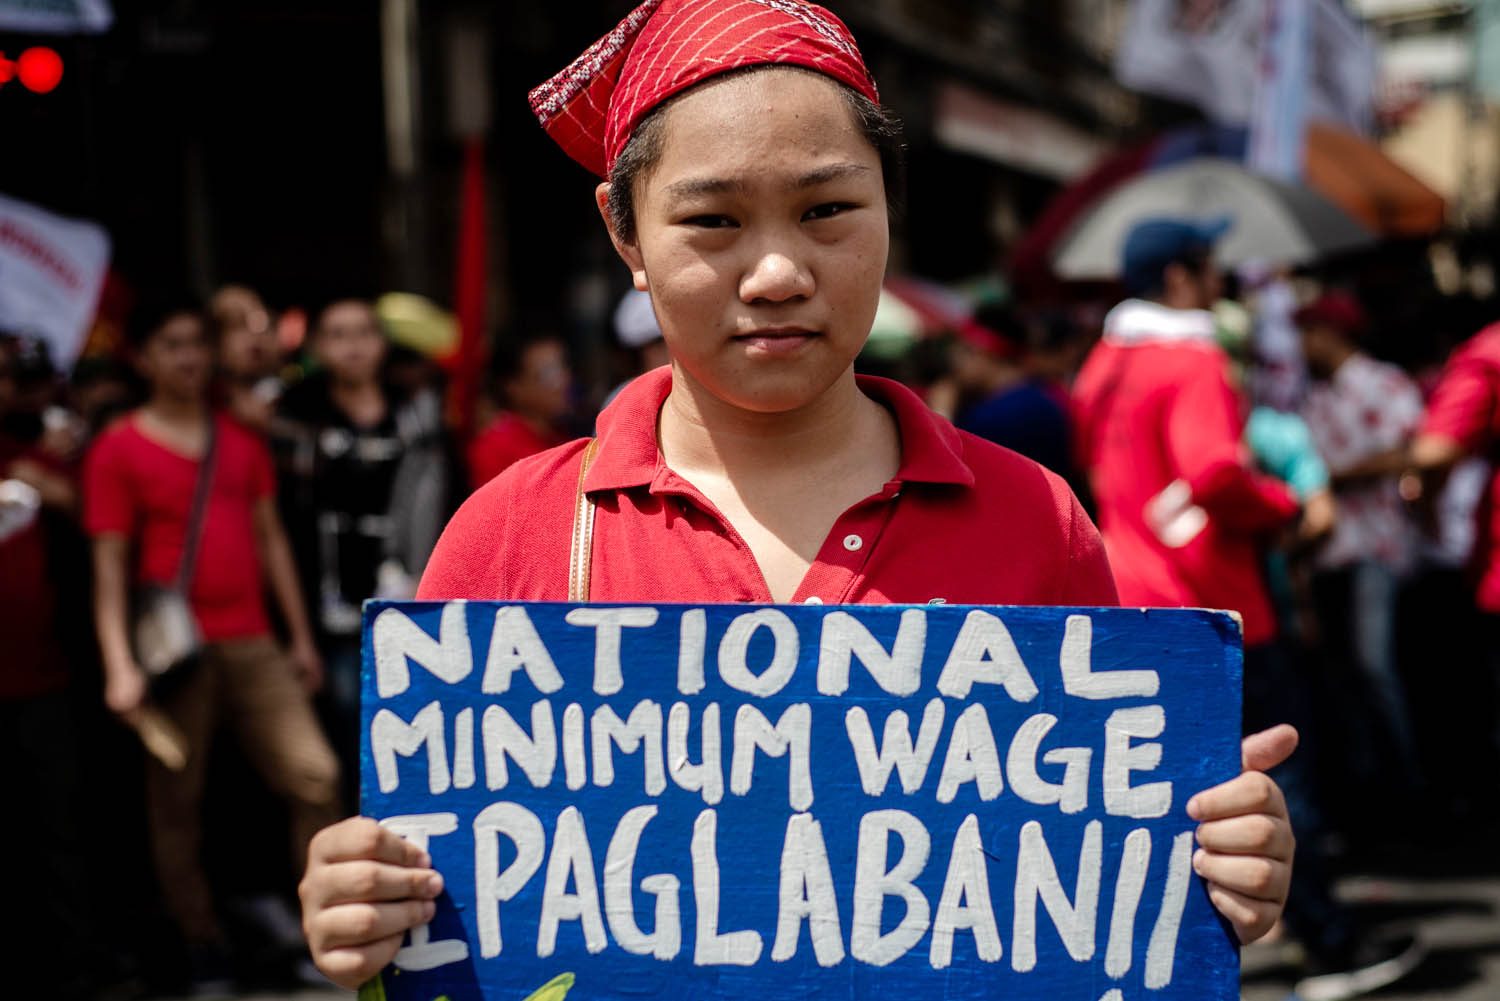 Diokno: ‘Let’s not push for higher wages’ amid high inflation